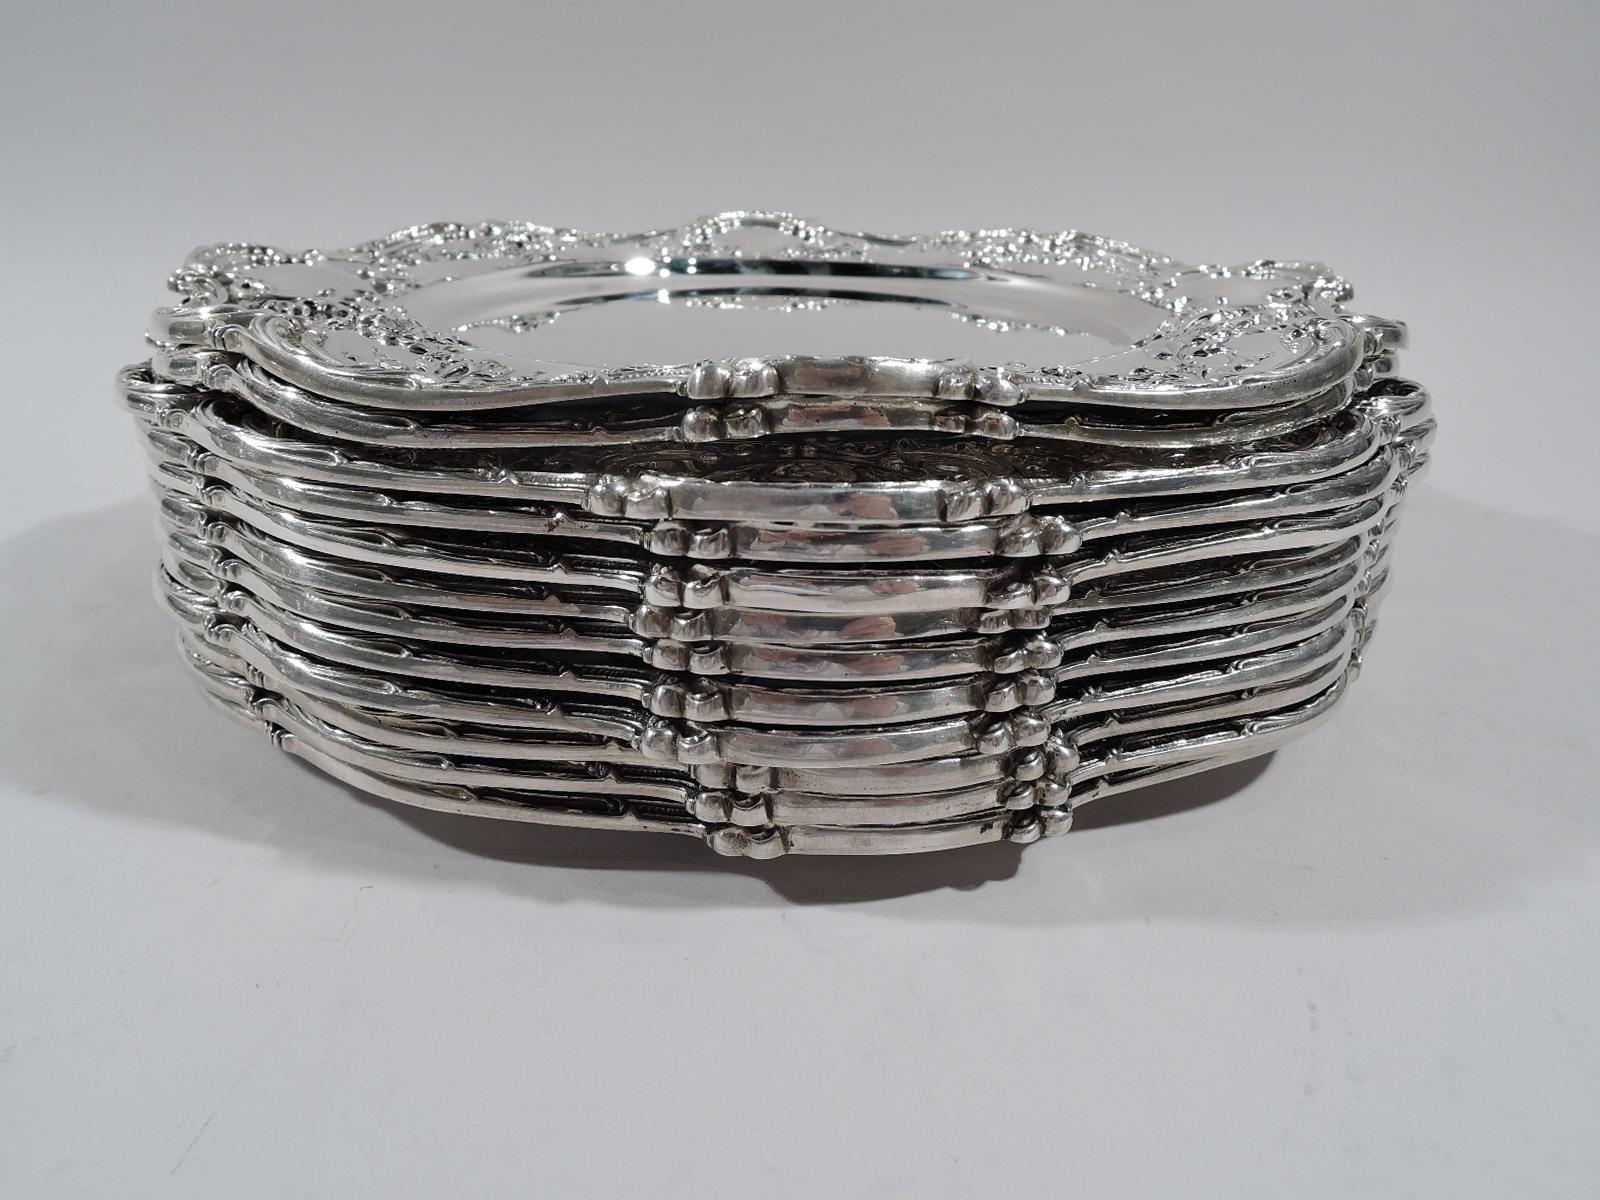 Set of 12 Edwardian Rococo sterling silver dinner plates. Made by Gorham in Providence. Each: Round well and scrolled rim. Shoulder has chased garlands alternating with scrolled frames (vacant). Fully marked including no. A6602. Two plates have 1907